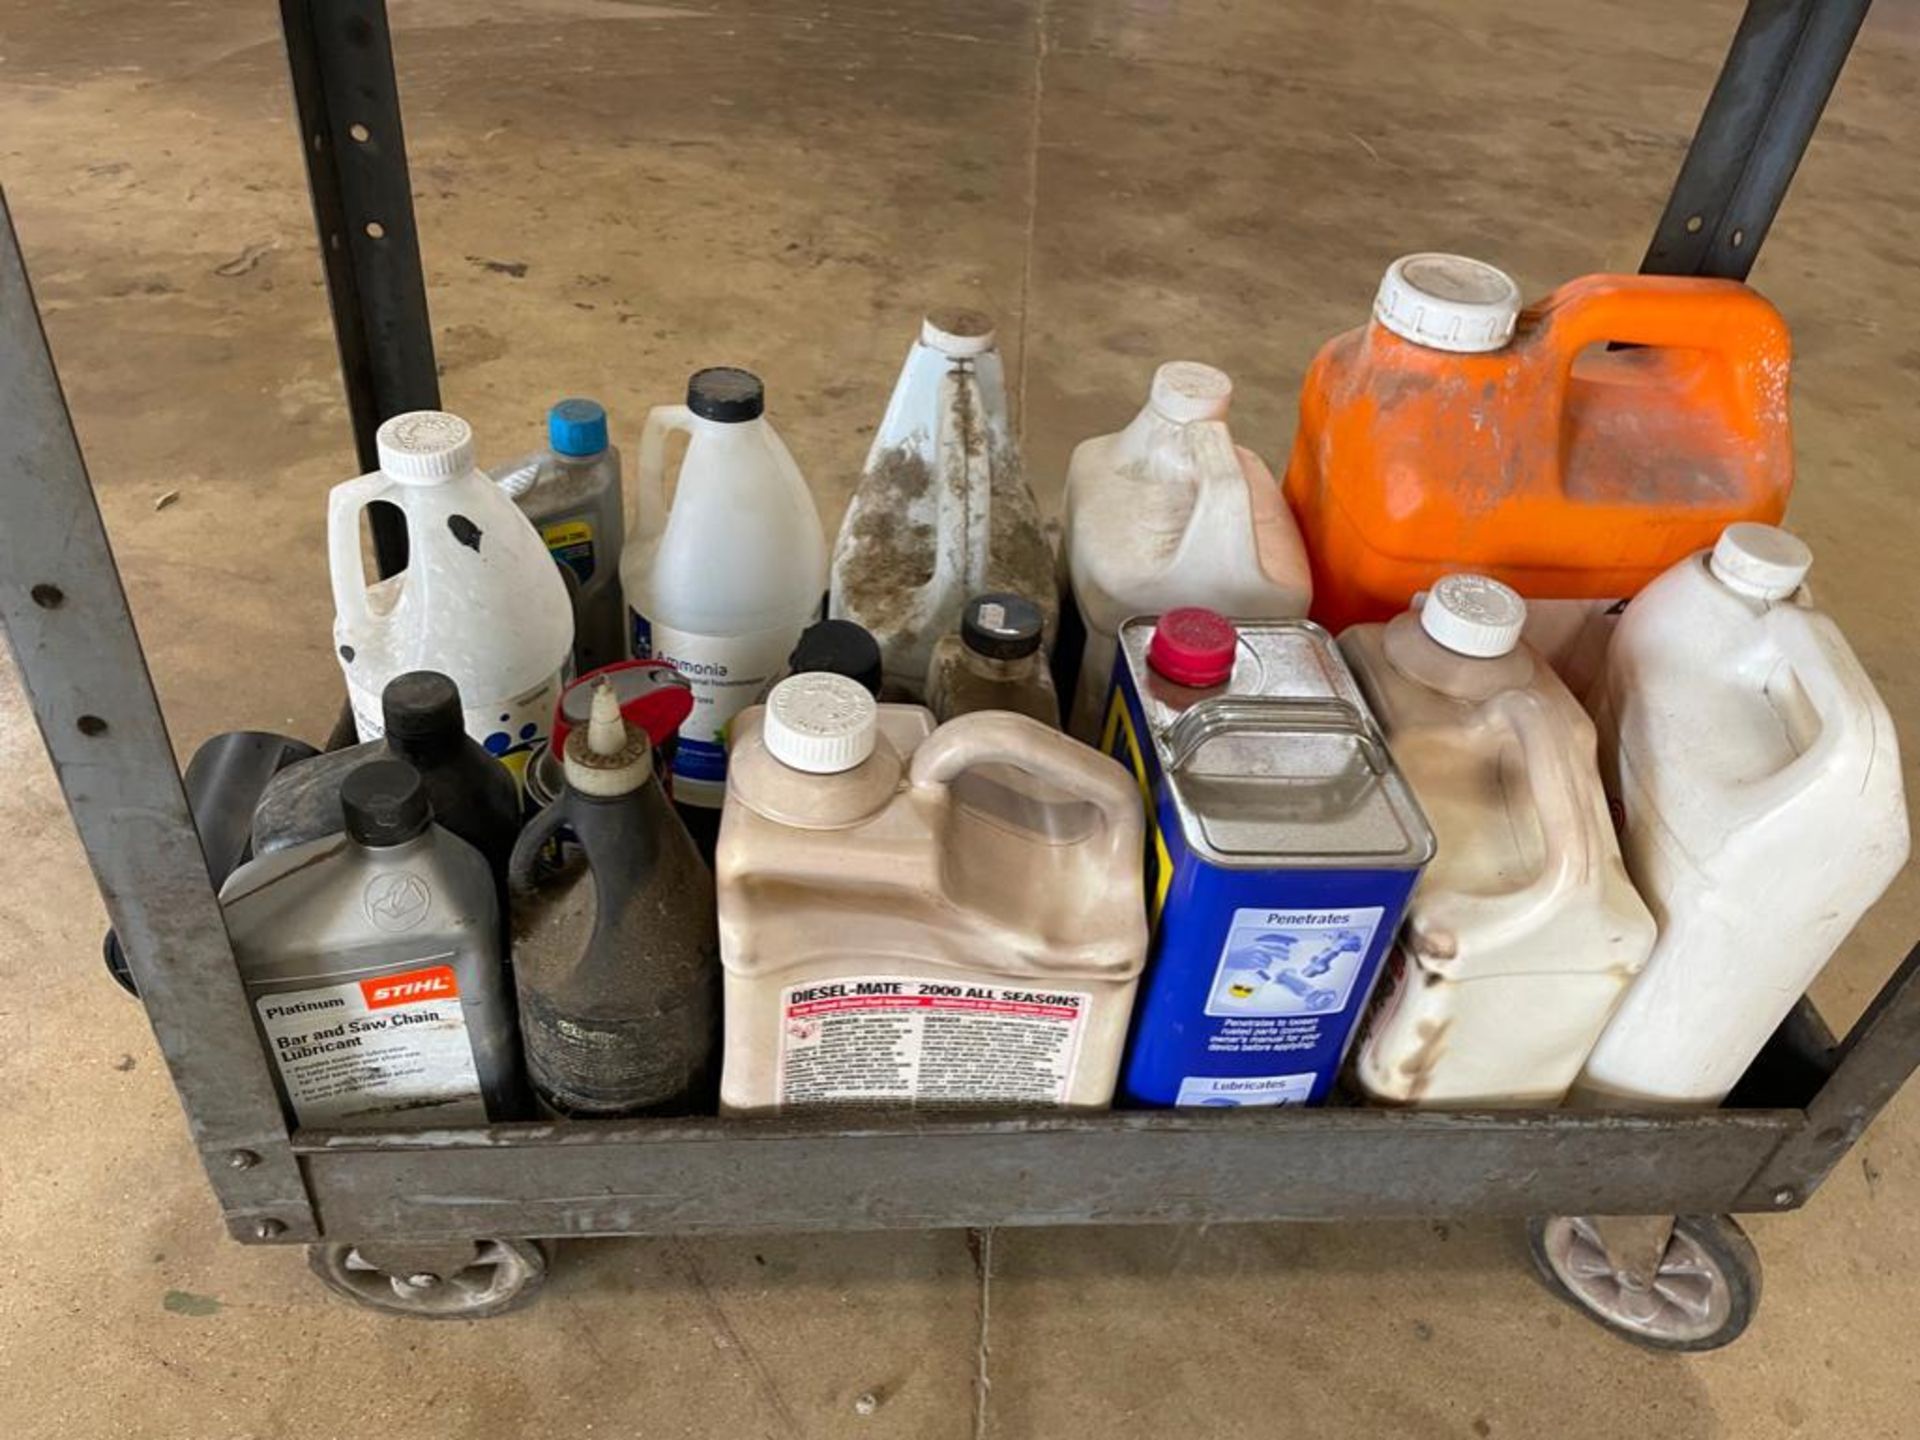 Cart of Shop Cleaning Chemicals & Supplies. Located in Hazelwood, MO - Image 2 of 11